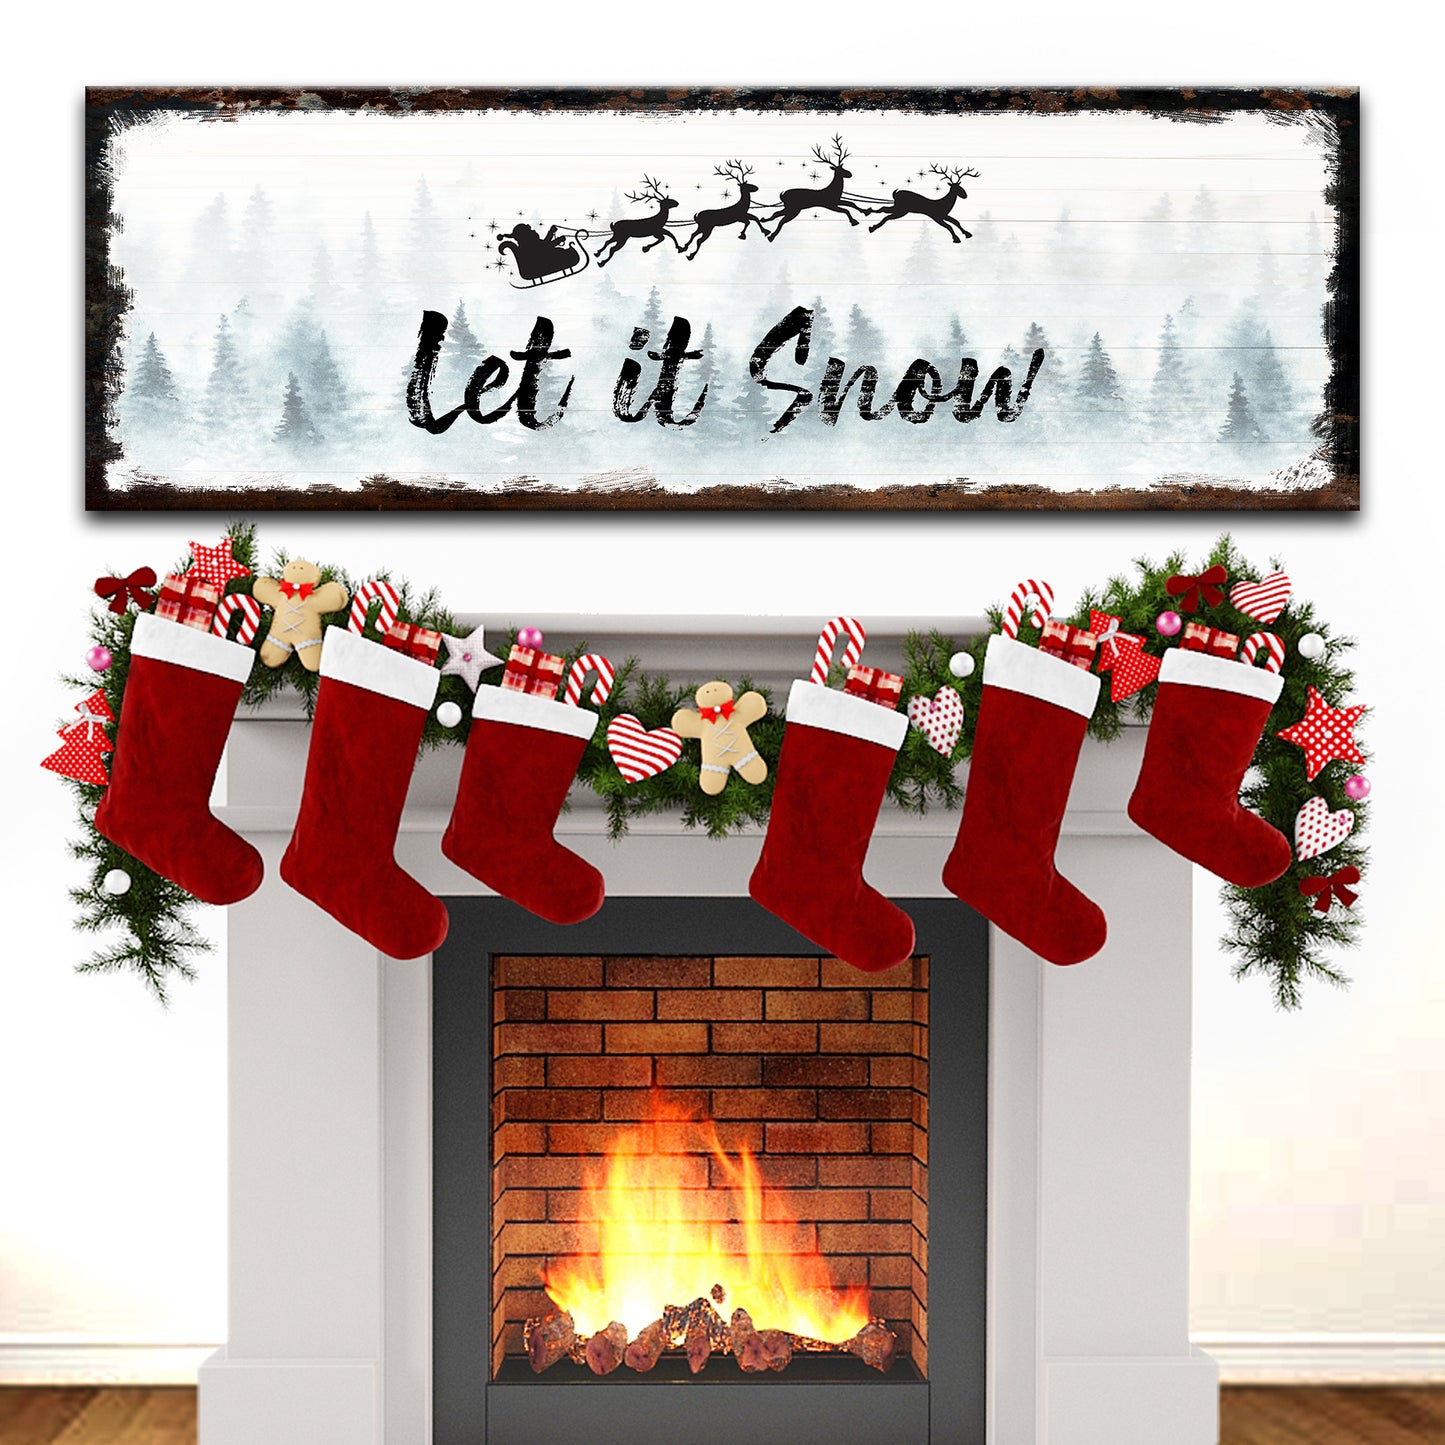 Let It Snow Sign - Image by Tailored Canvases